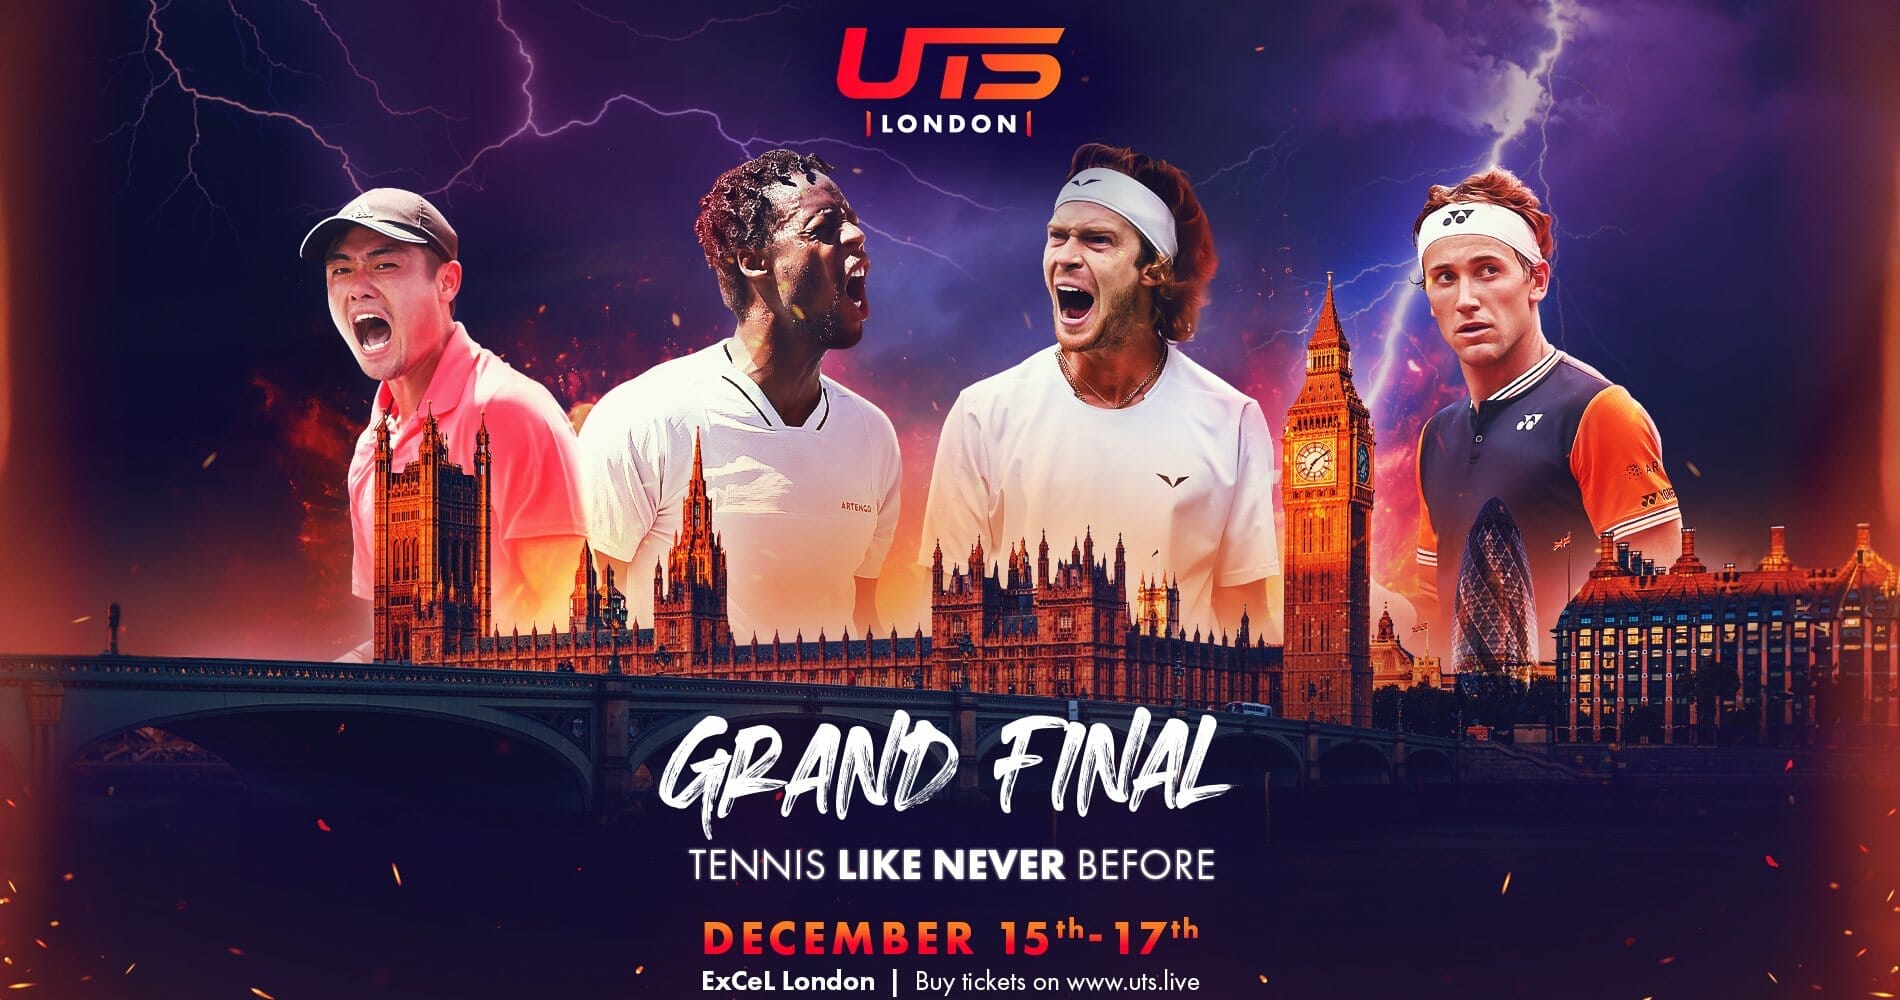 Ruud, Rublev, Wu and Monfils confirmed for UTS Grand Final in London